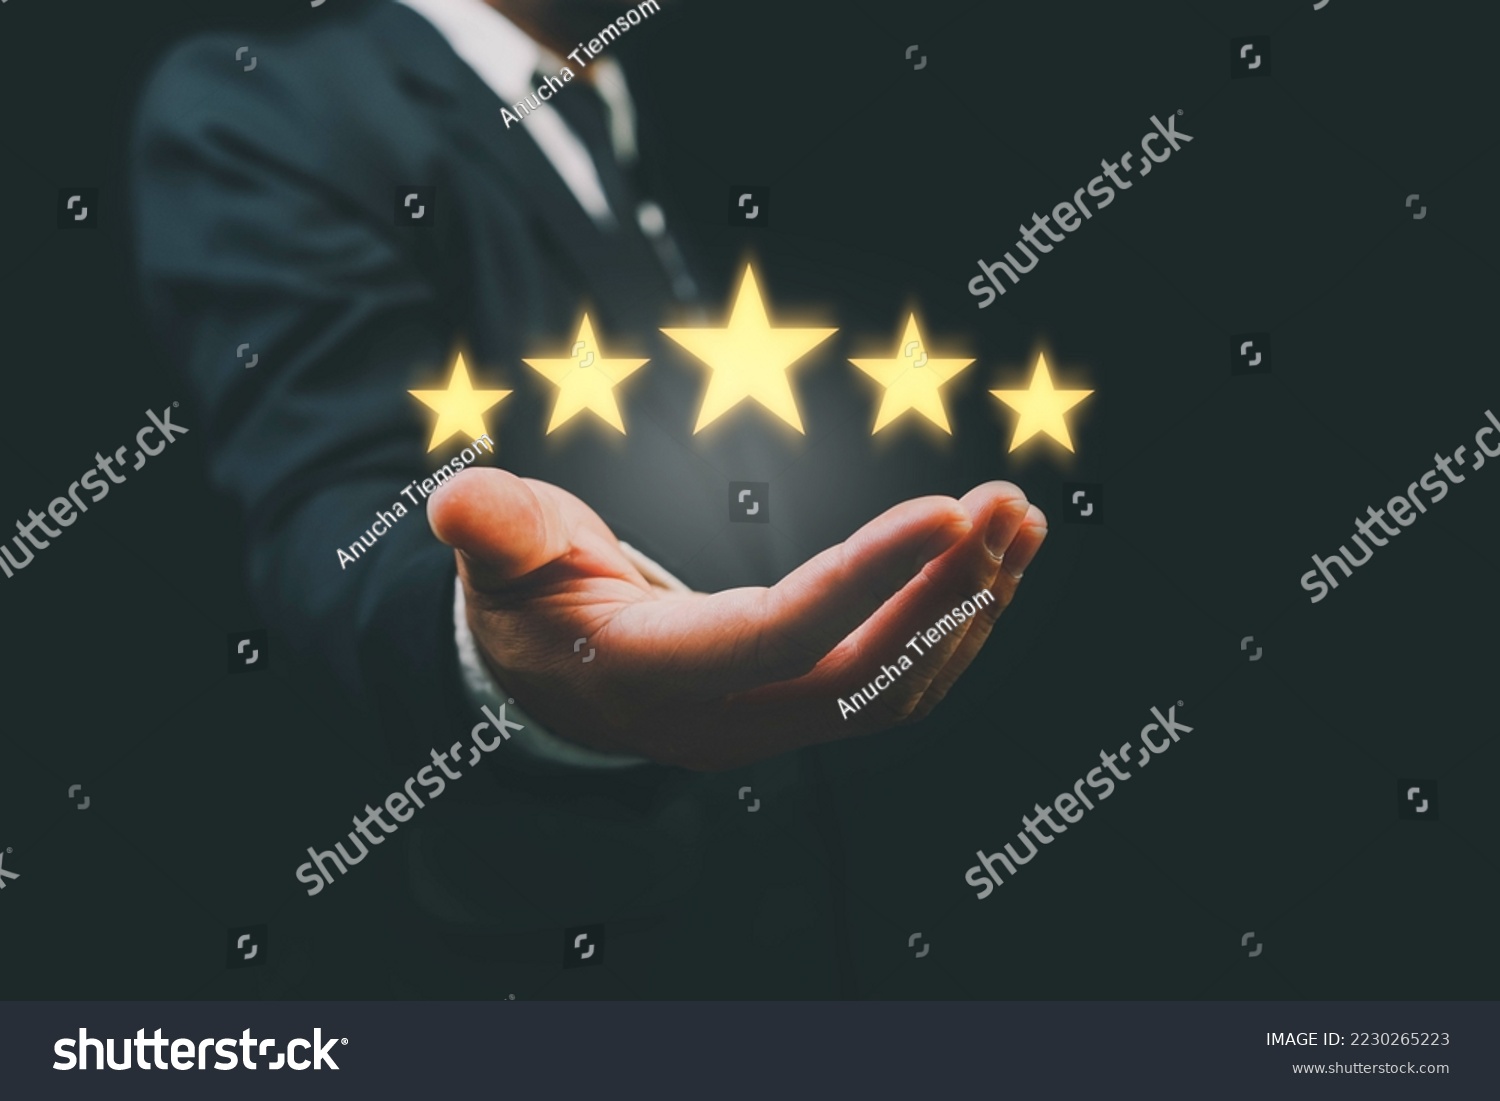 Customer evaluation feedback. men in suit Giving Positive Review for Client's Satisfaction Surveys. giving a five star rating. Service rating, satisfaction concept. #2230265223